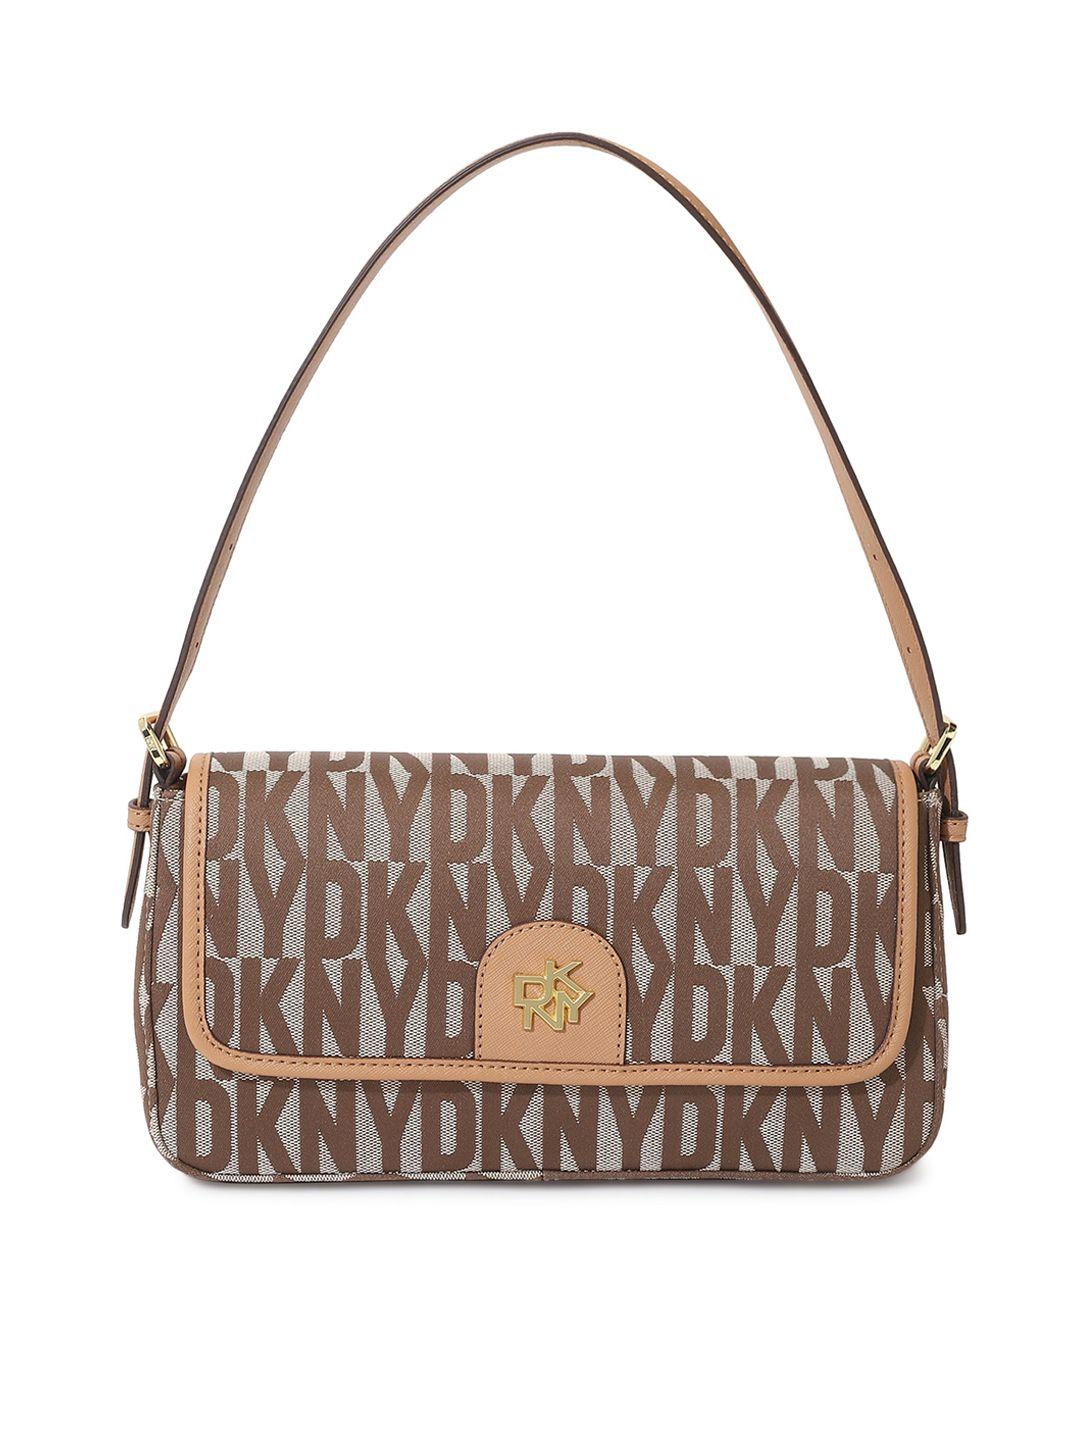 dkny printed leather structured handheld bag